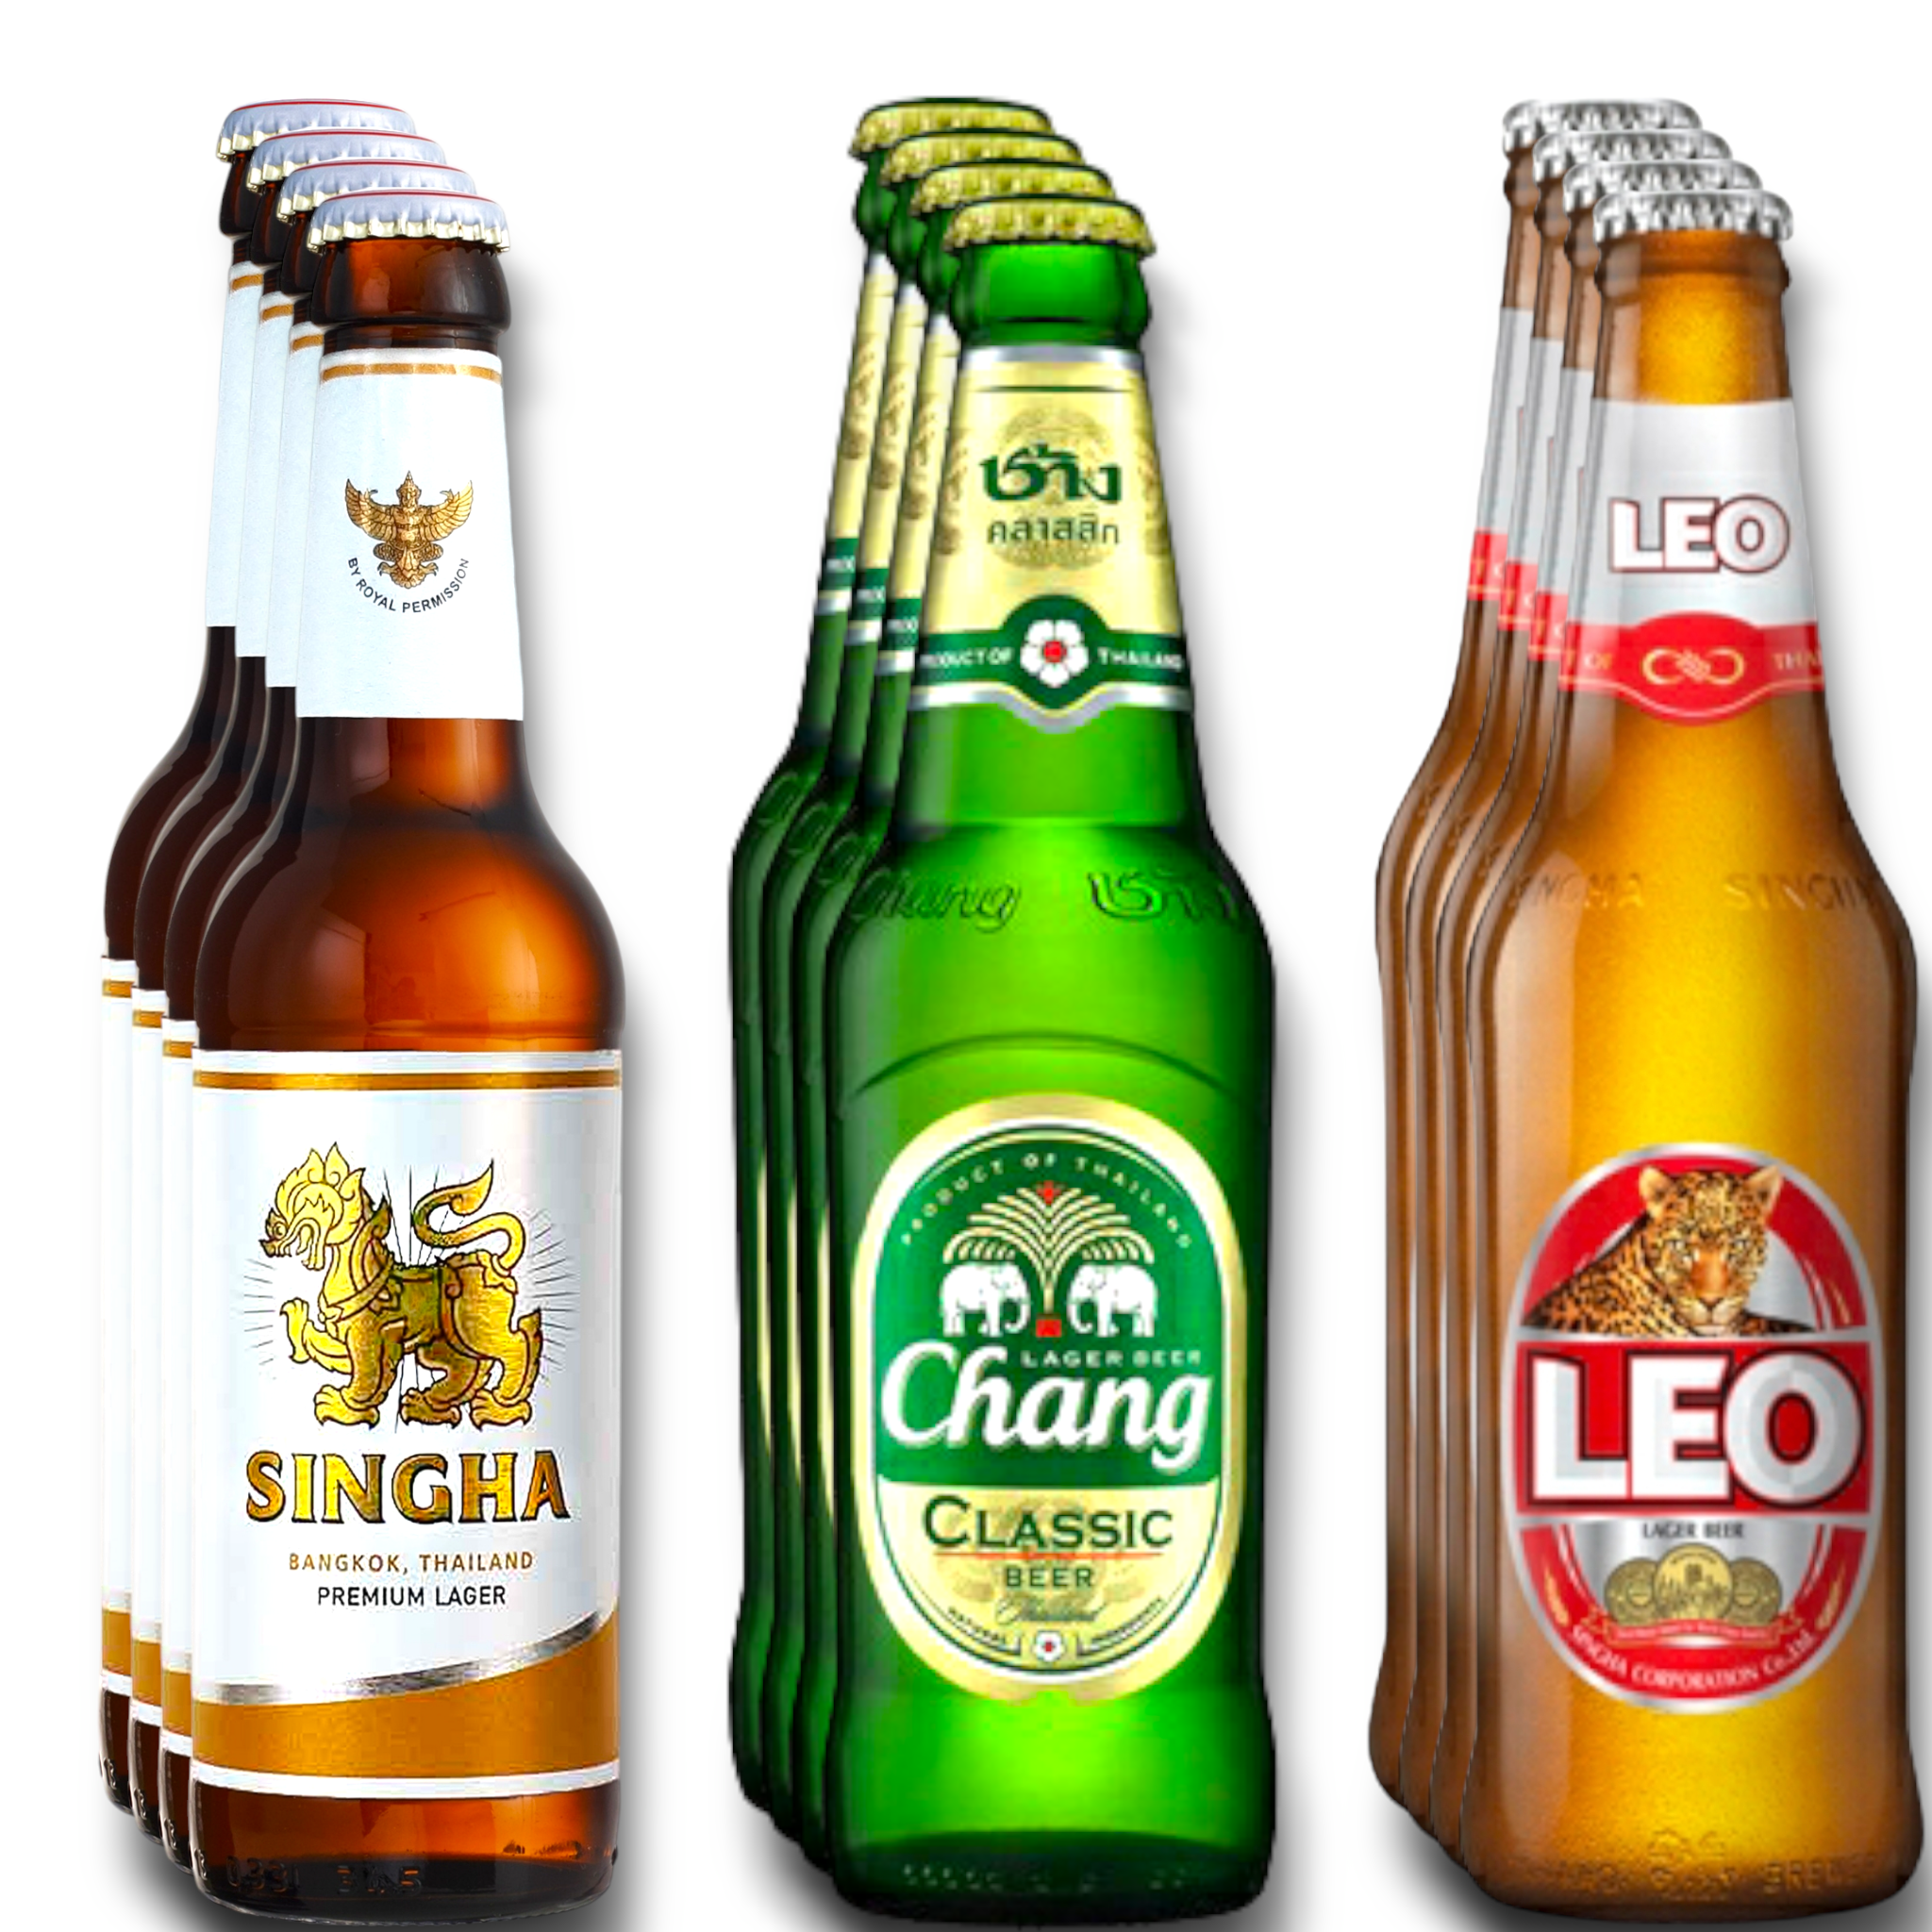 Entdecke Thailand - Singha Premium Lager, Chang Classic & Leo Lager Beer